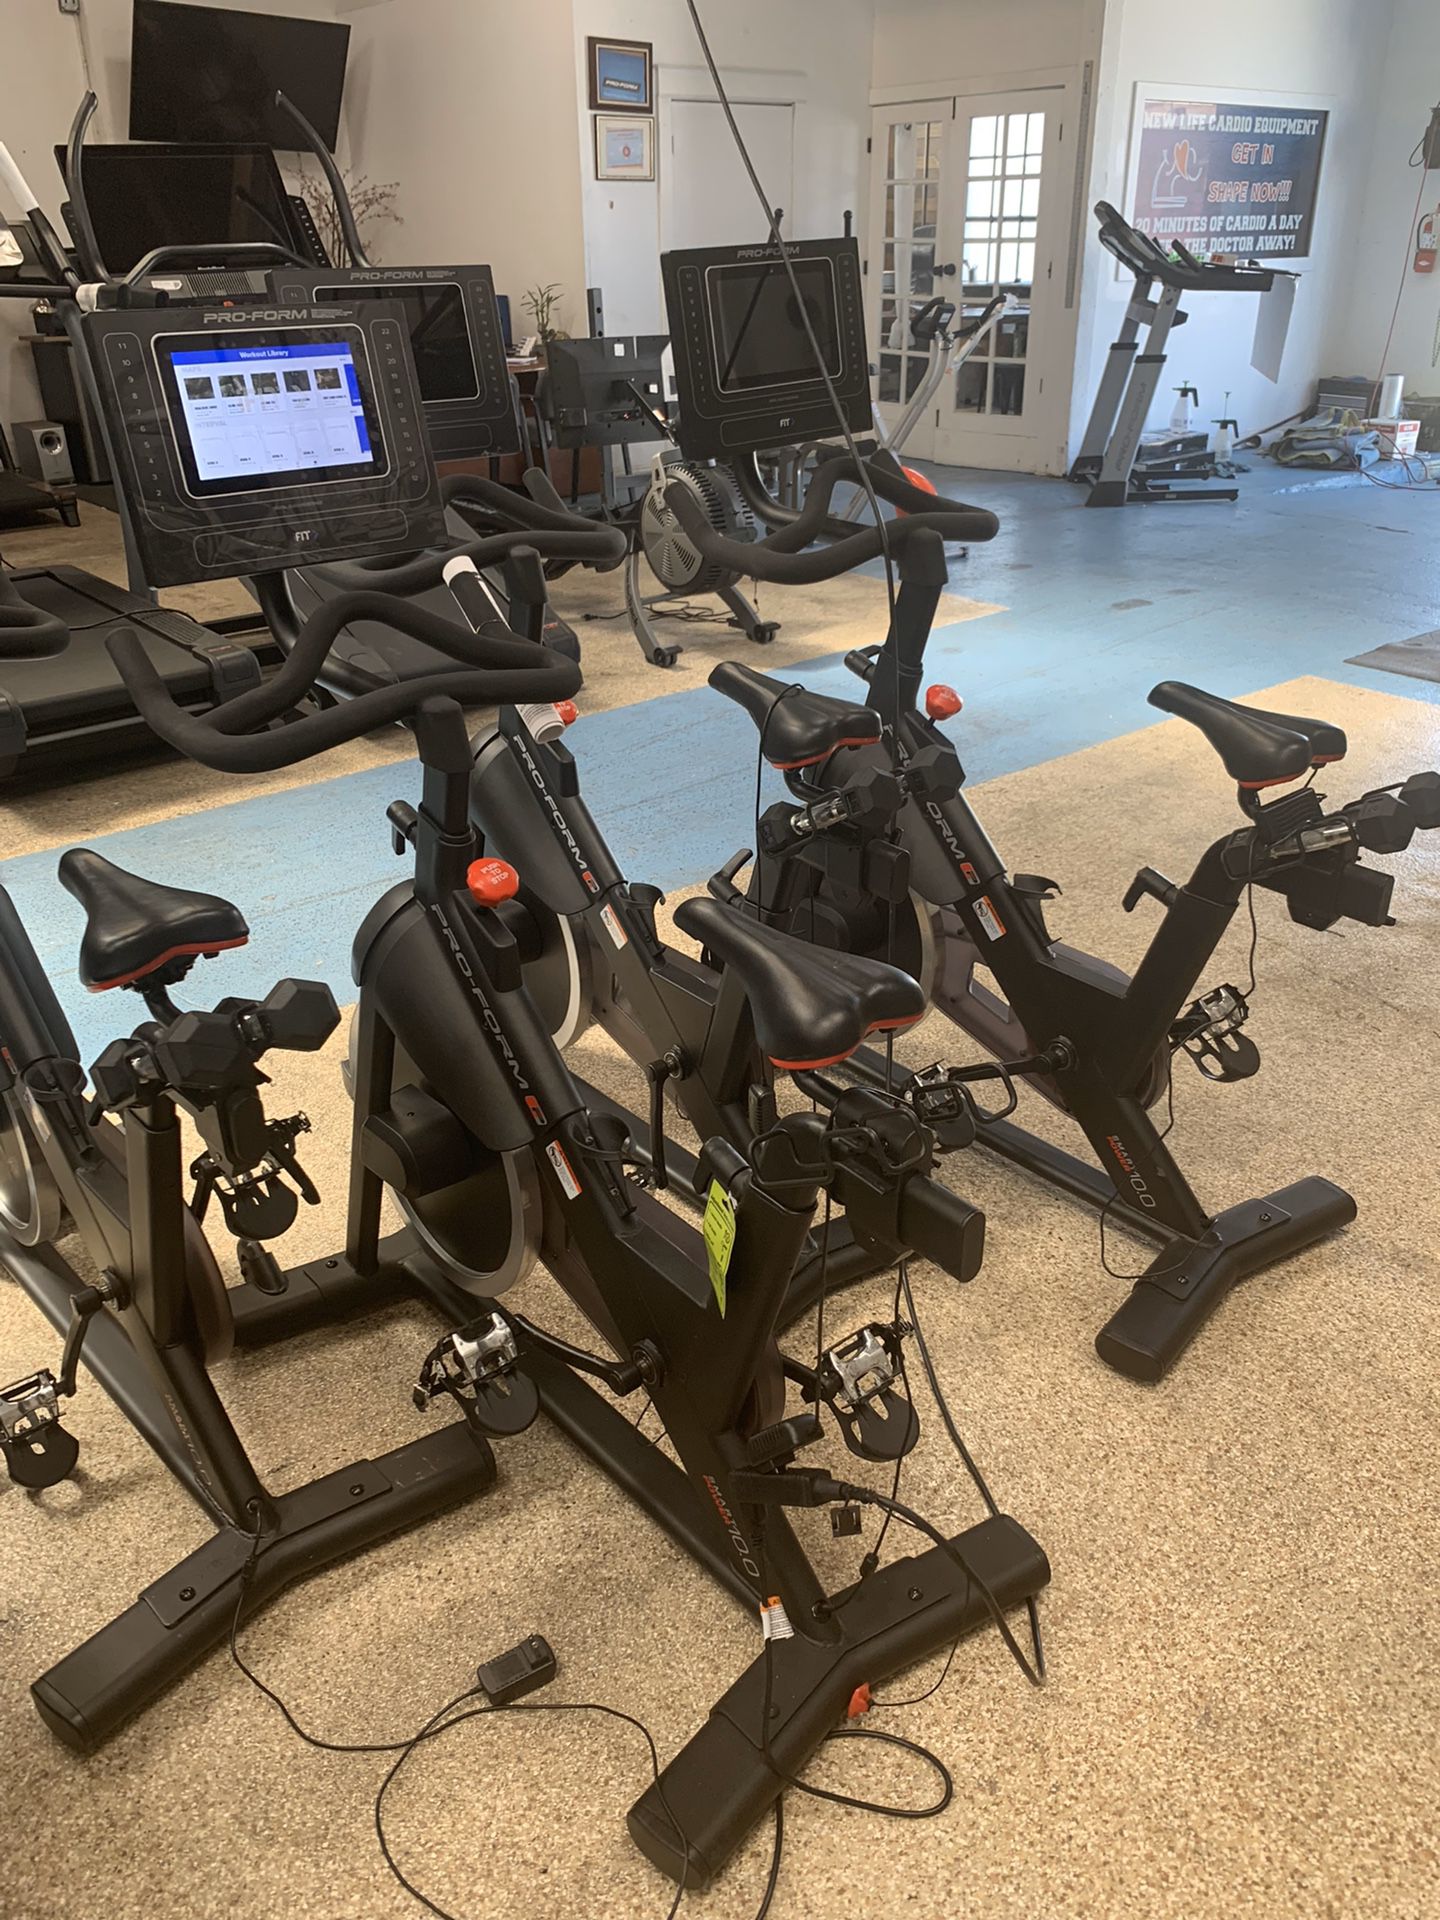 INTERACTIVE SPIN BIKE with spin classes (like Peloton but only 1/3 the price)